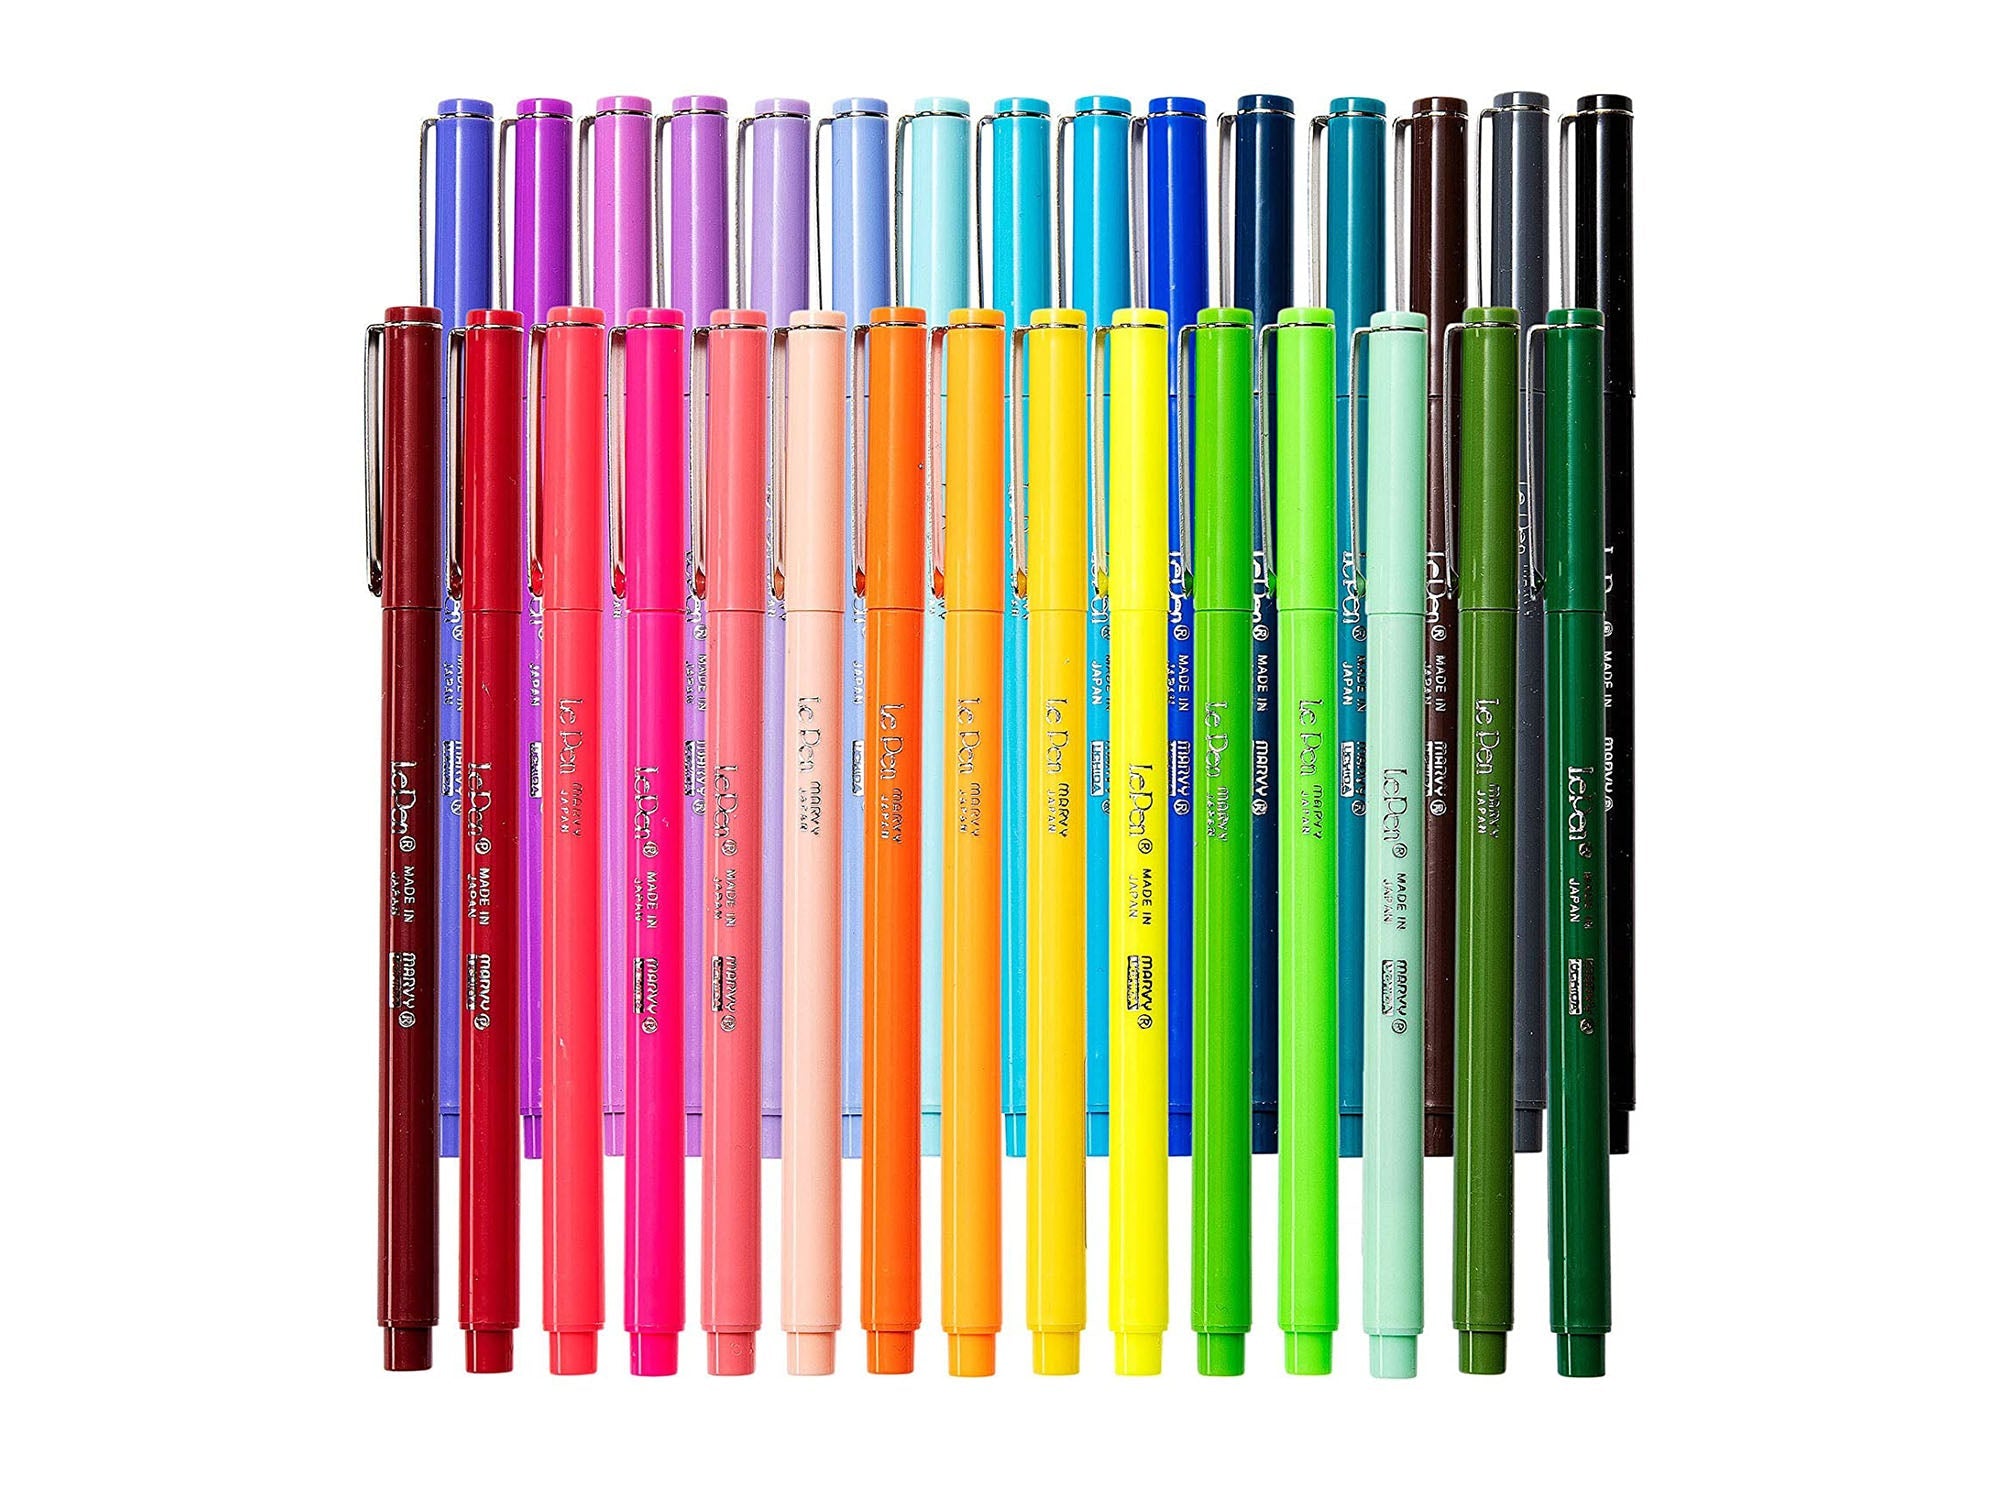 Marvy Uchida Le Pastel Pen Set 4300,Multicolor,Great for notes, planners  and journaling,Smooth and